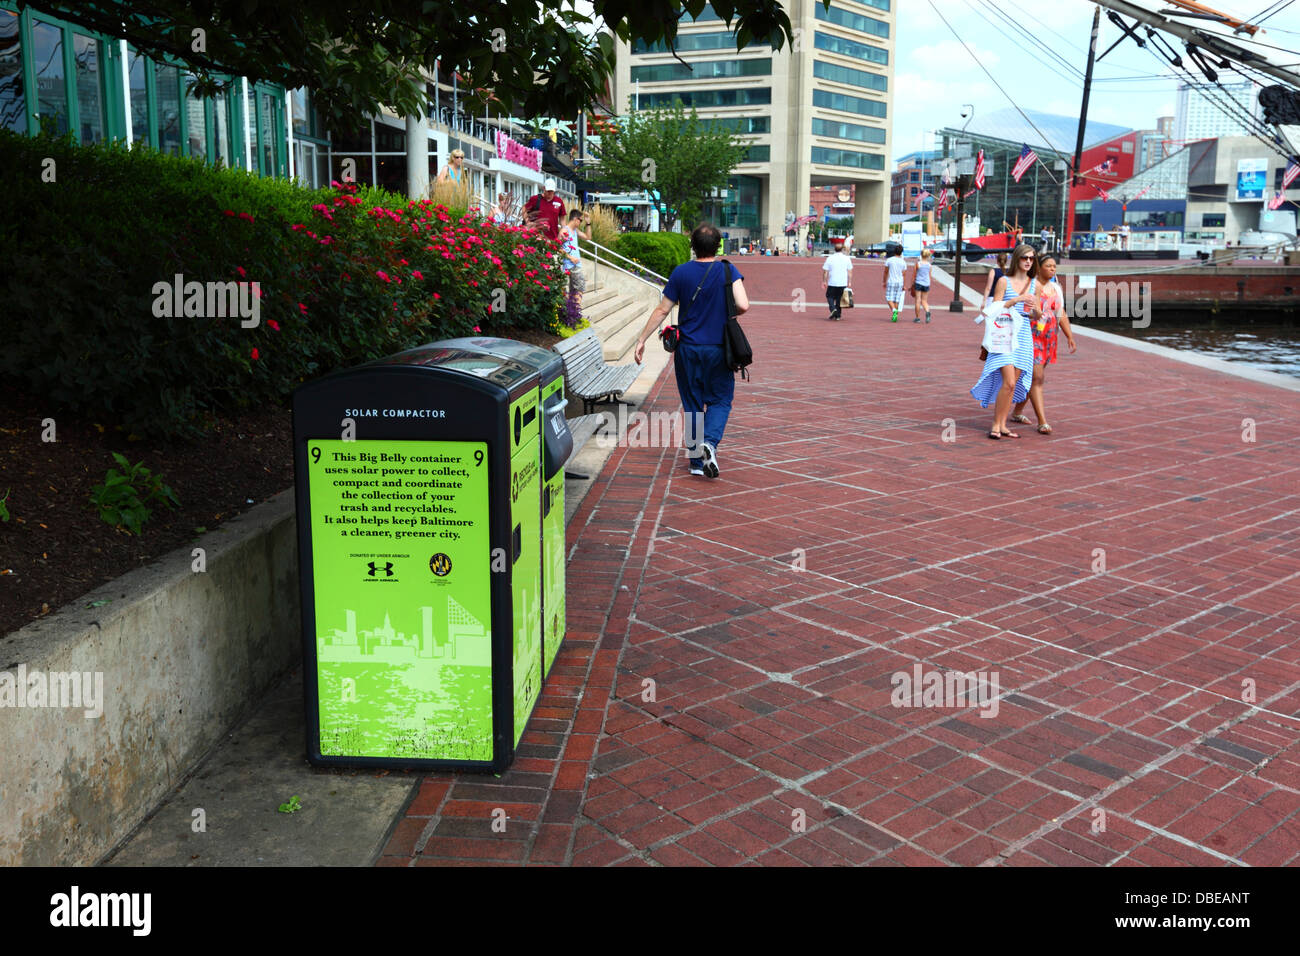 BigBelly solar powered, rubbish-compacting and recycling bins, Inner Harbor, Baltimore City, Maryland, United States of America Stock Photo